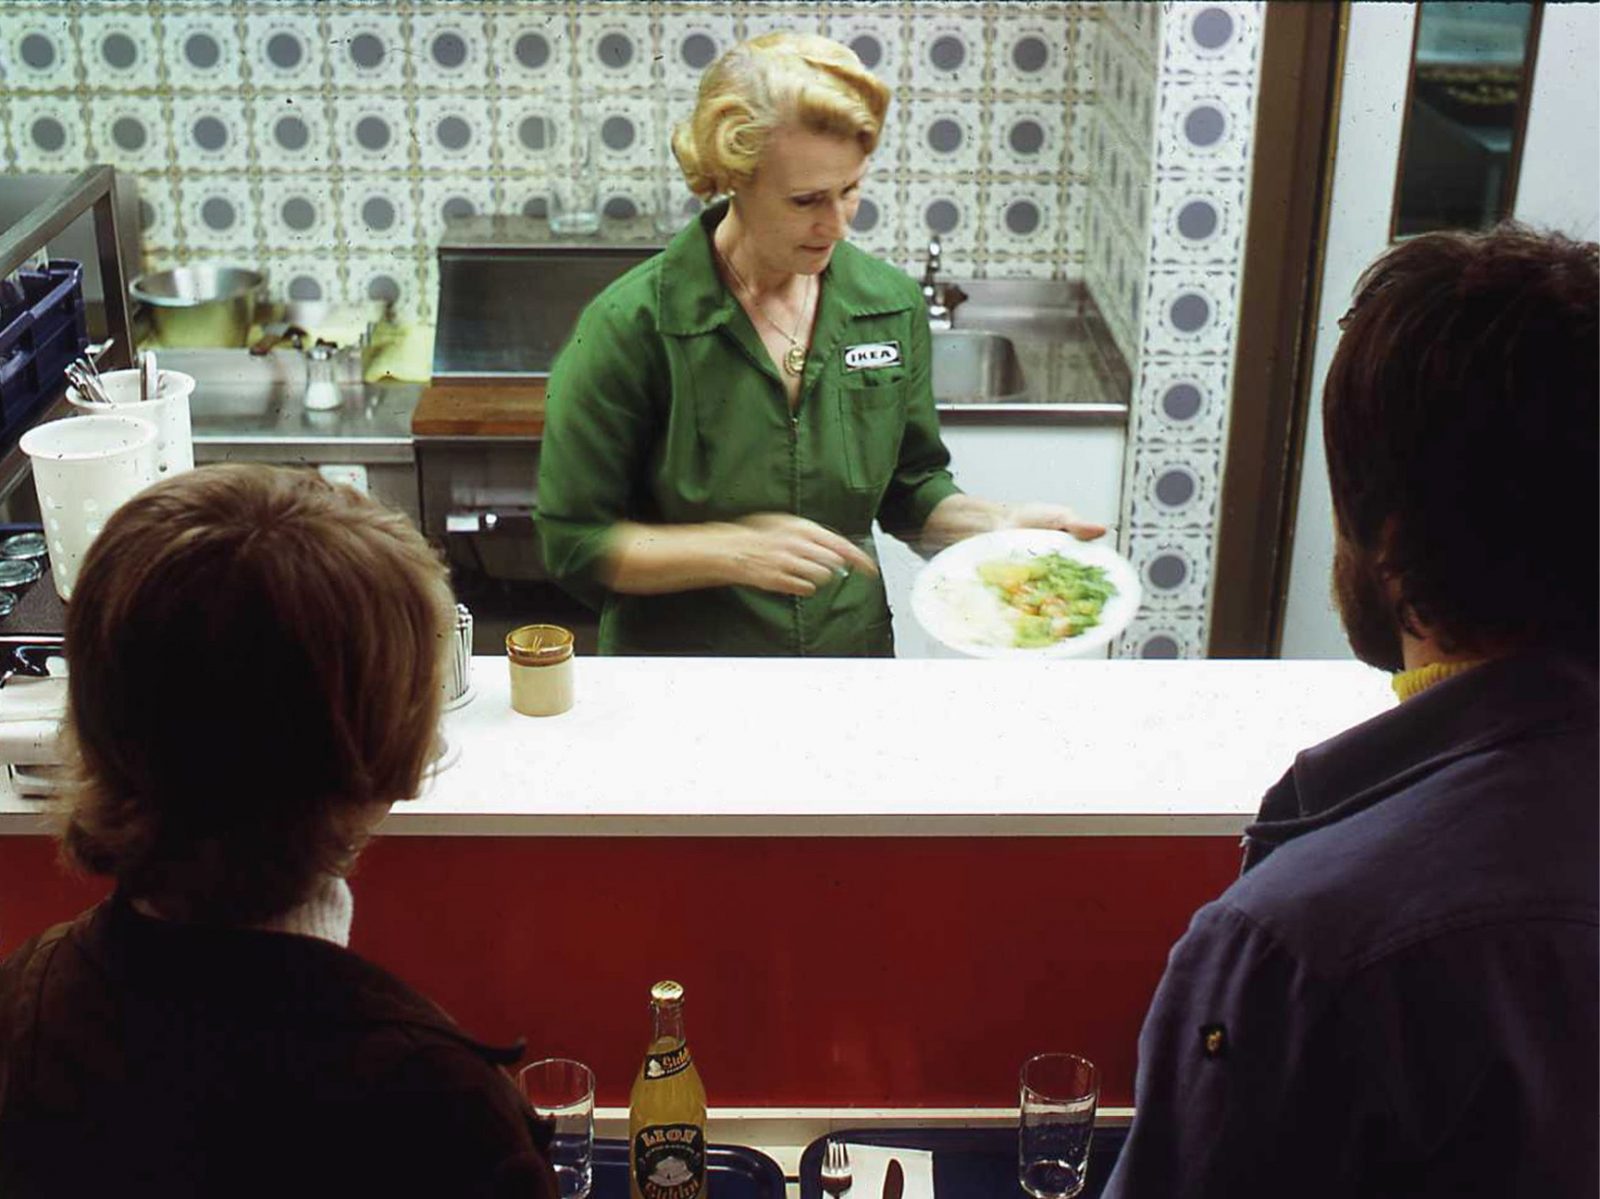 A couple at a self-service counter wait for their food, prepared by a blonde woman in green IKEA 1960s uniform.